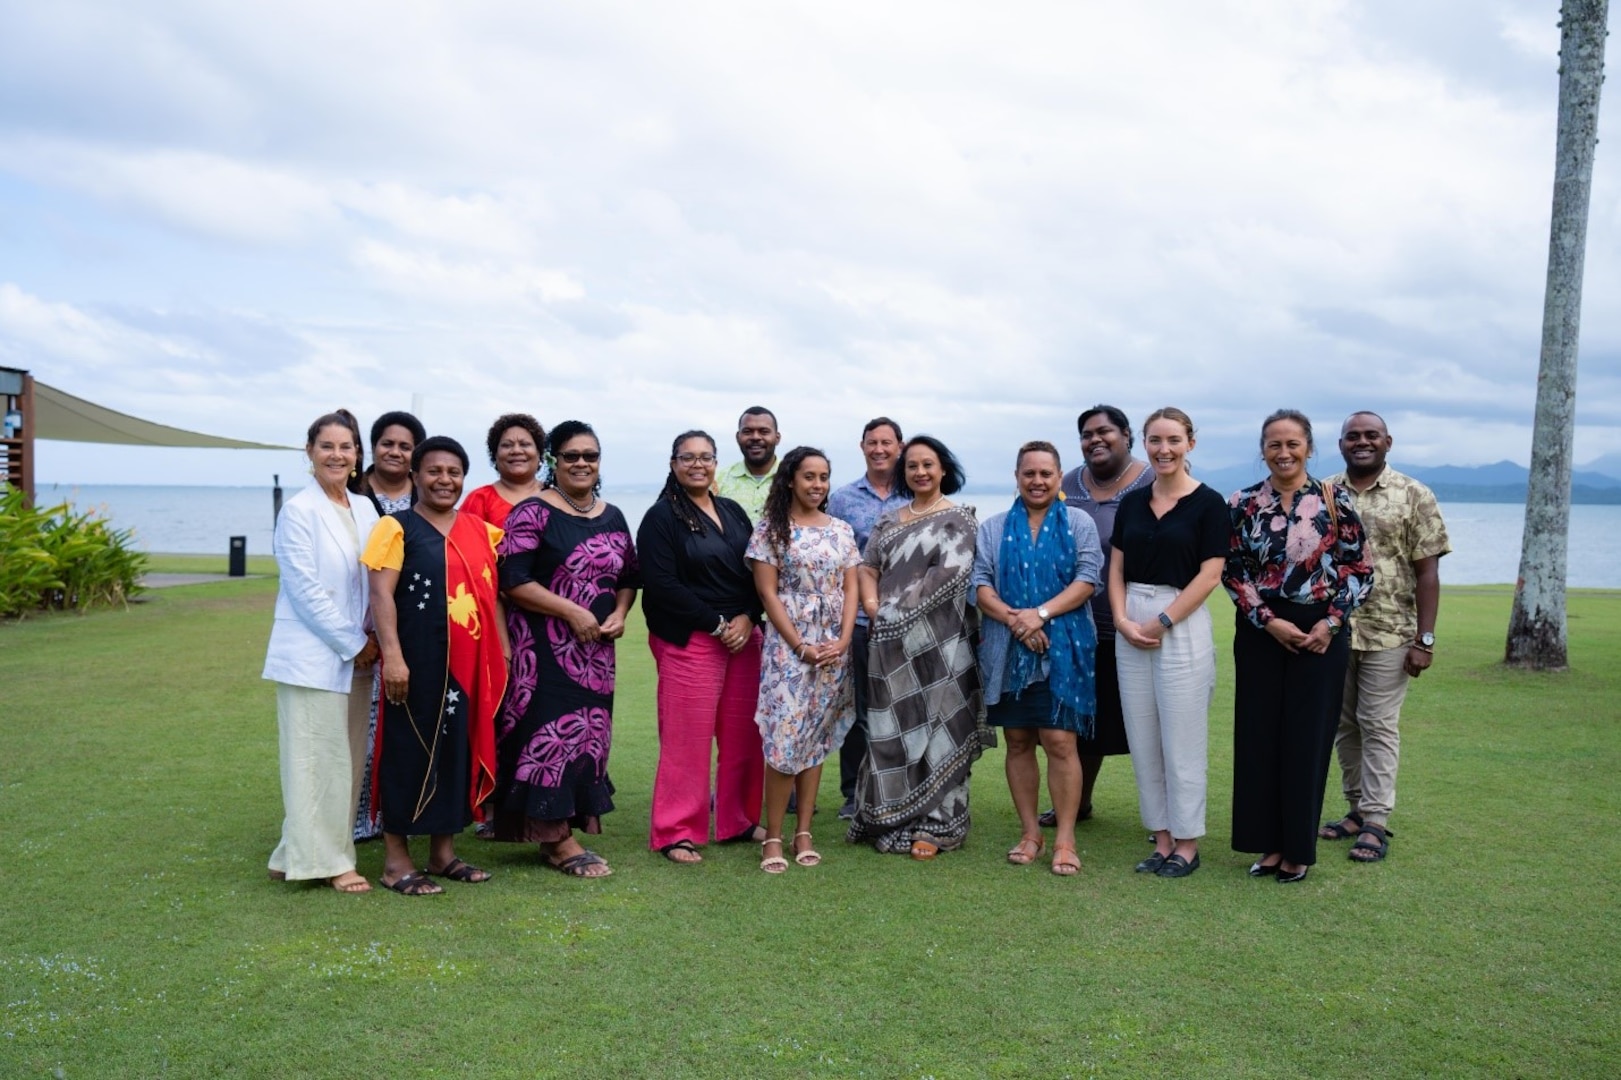 Participants pose for a group photo during the U.S. Indo-Pacific Command Office of Women, Peace & Security (WPS) workshop on “Building Inclusive Resilience” July 11-12 in Suva, Fiji. The event was the second part of a multi-year initiative by the INDOPACOM WPS office to advance women, peace and security and elevate women’s voices and leadership in the Pacific Islands.